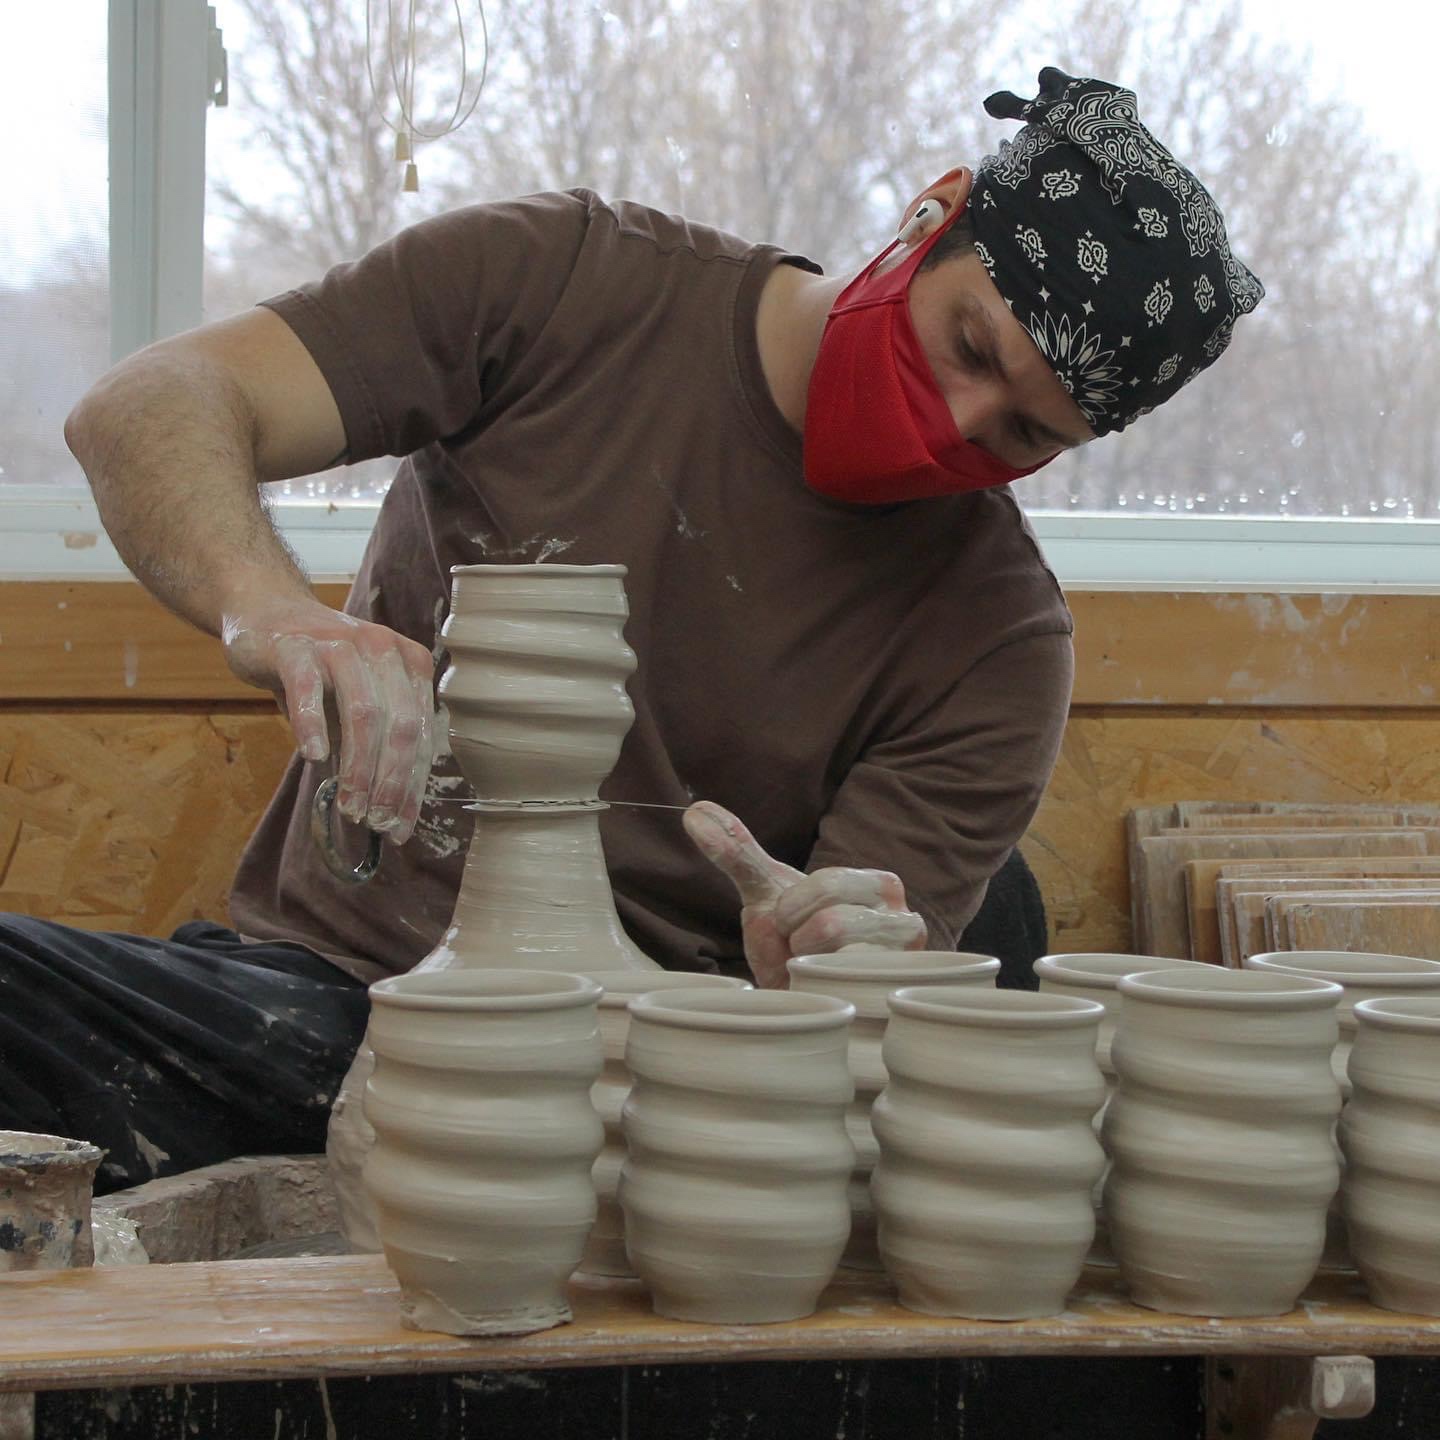 Potters' Peak – Delicious coffee, beautiful pottery & yes classes too